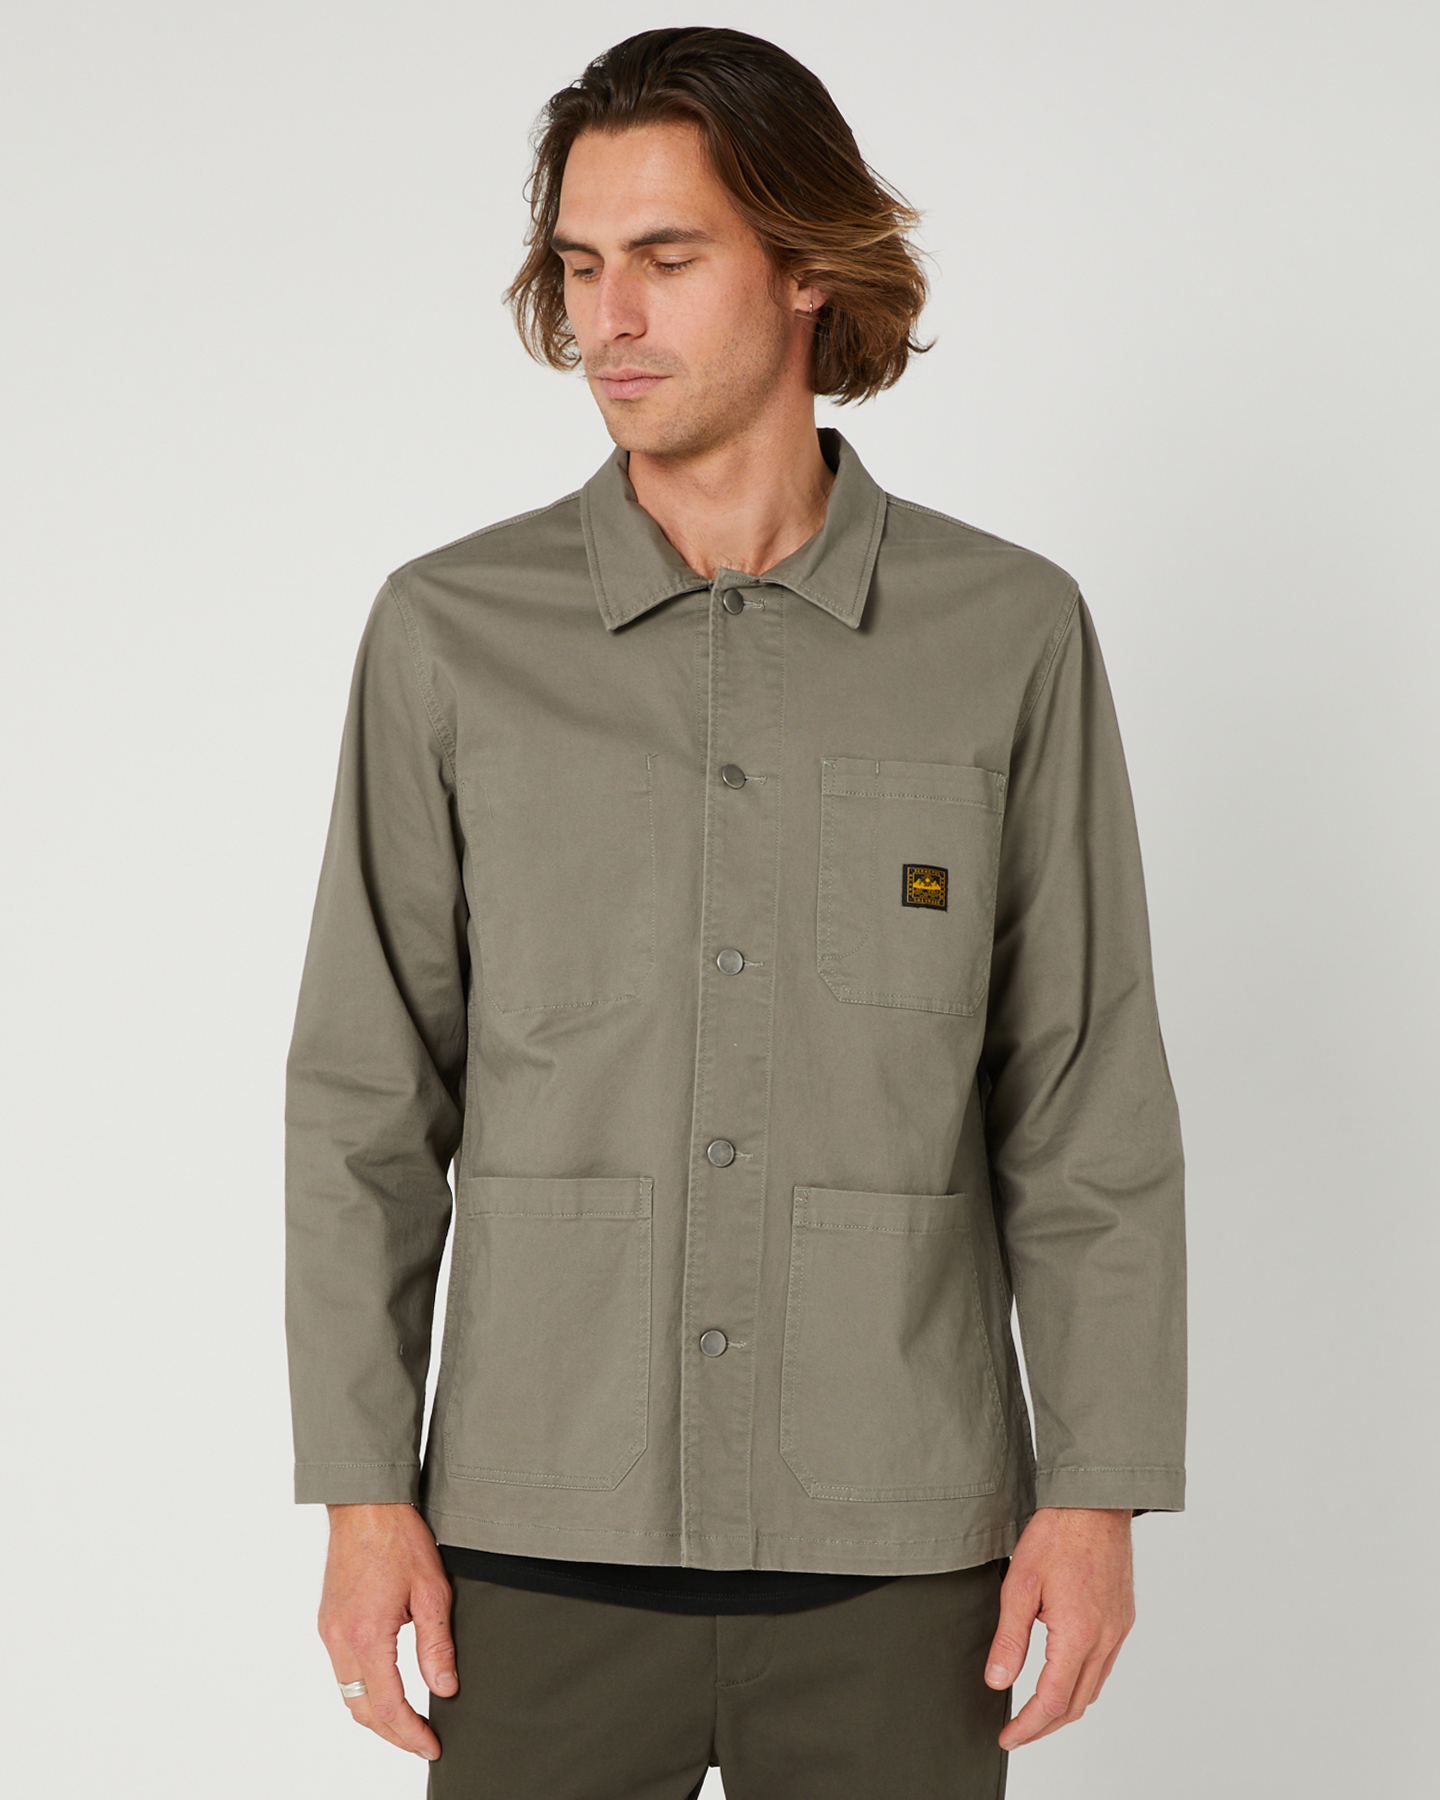 Depactus Carter Twill Chore Jacket - Military | SurfStitch